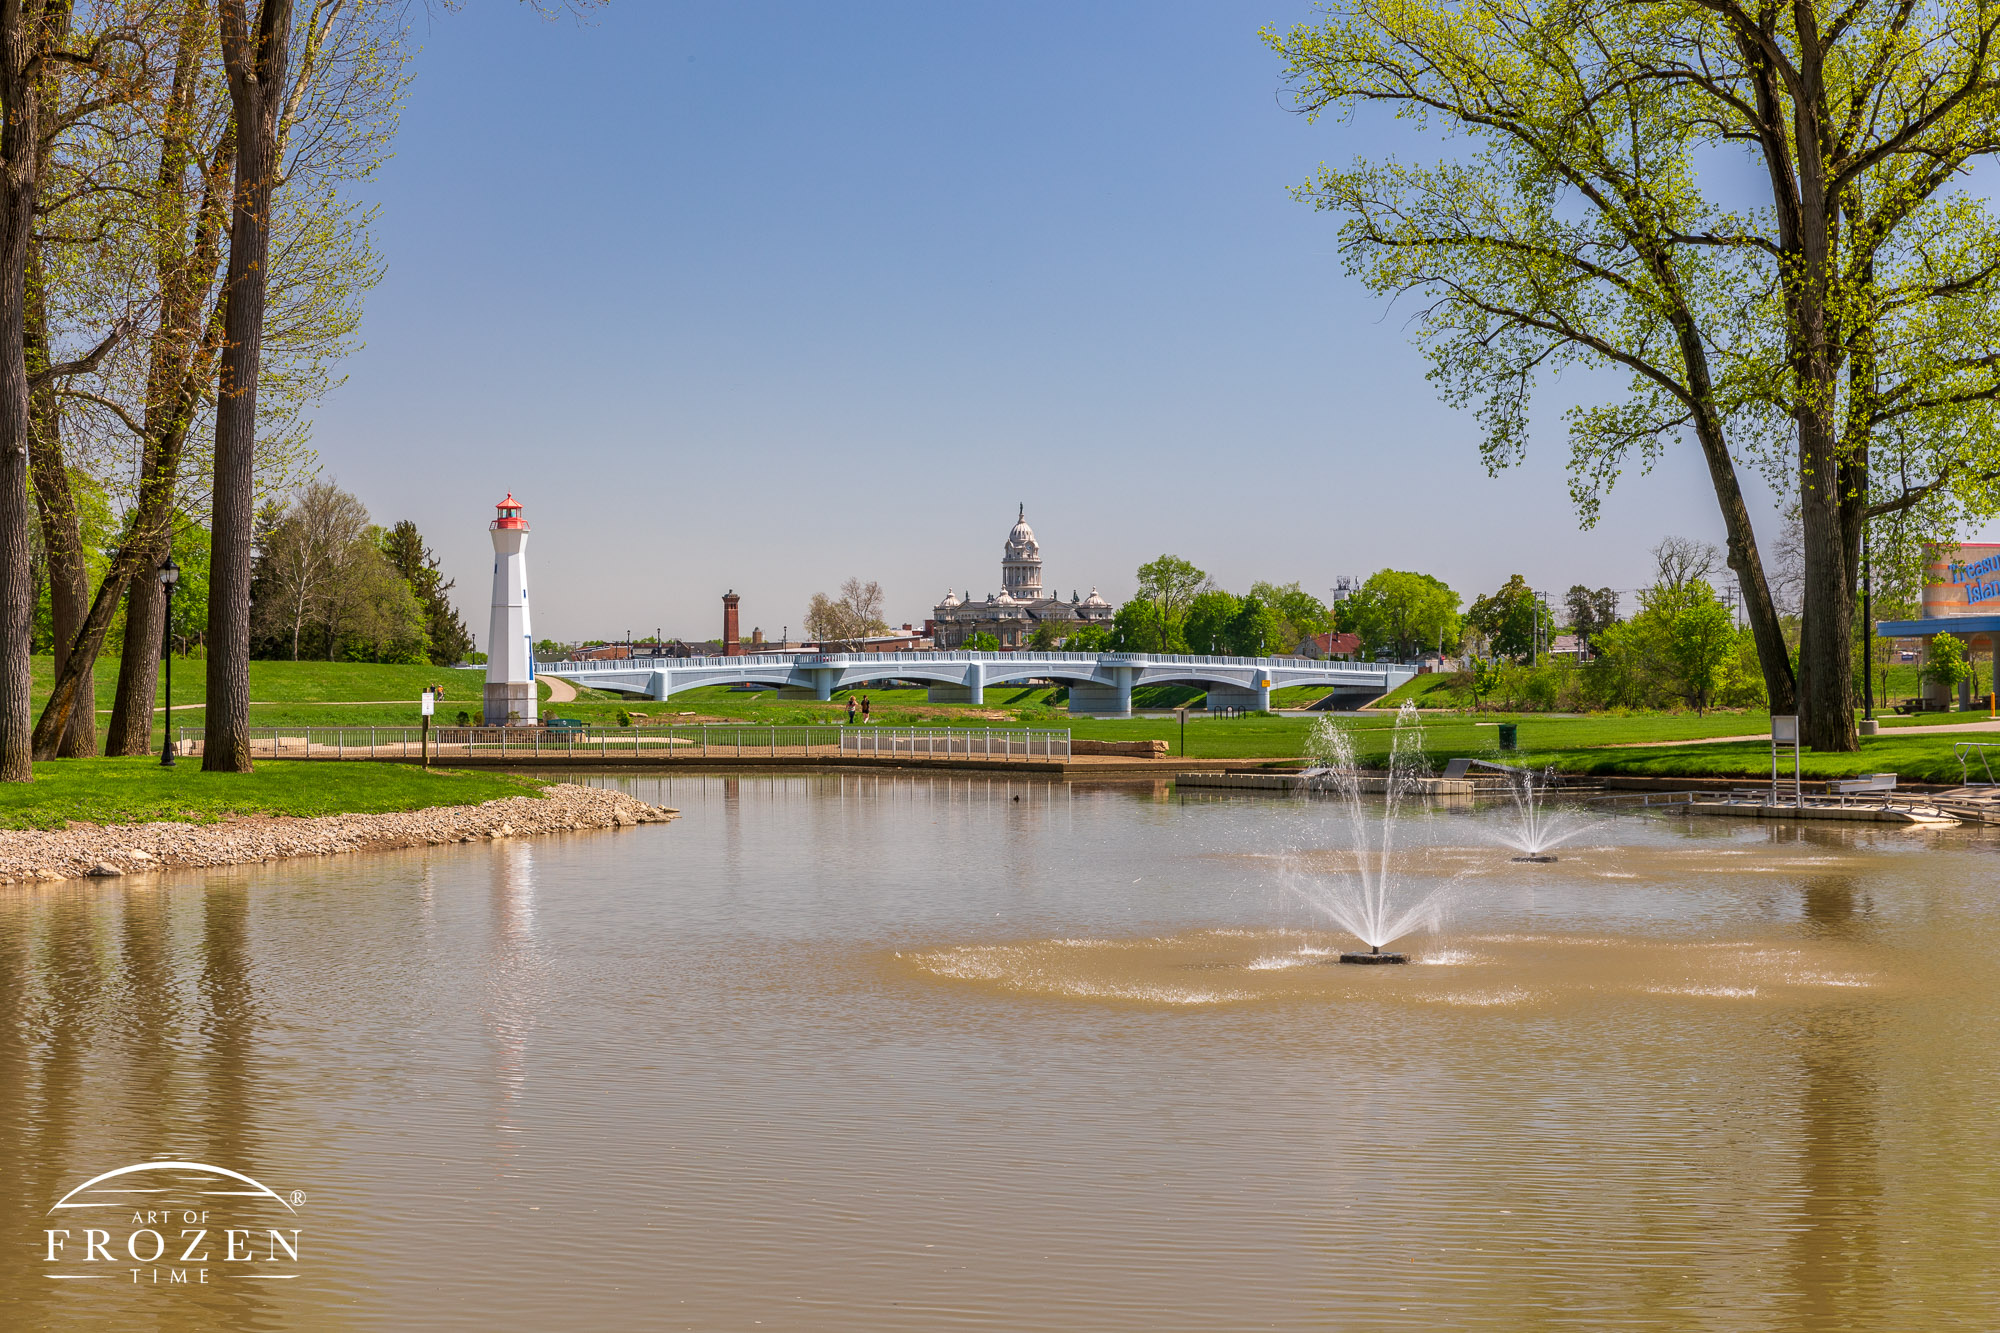 A view from Smith’s Boathouse Restaurant balcony showing the Great Miami River, Adams Street Bridge and the Miami County Courthouse all under blue skies